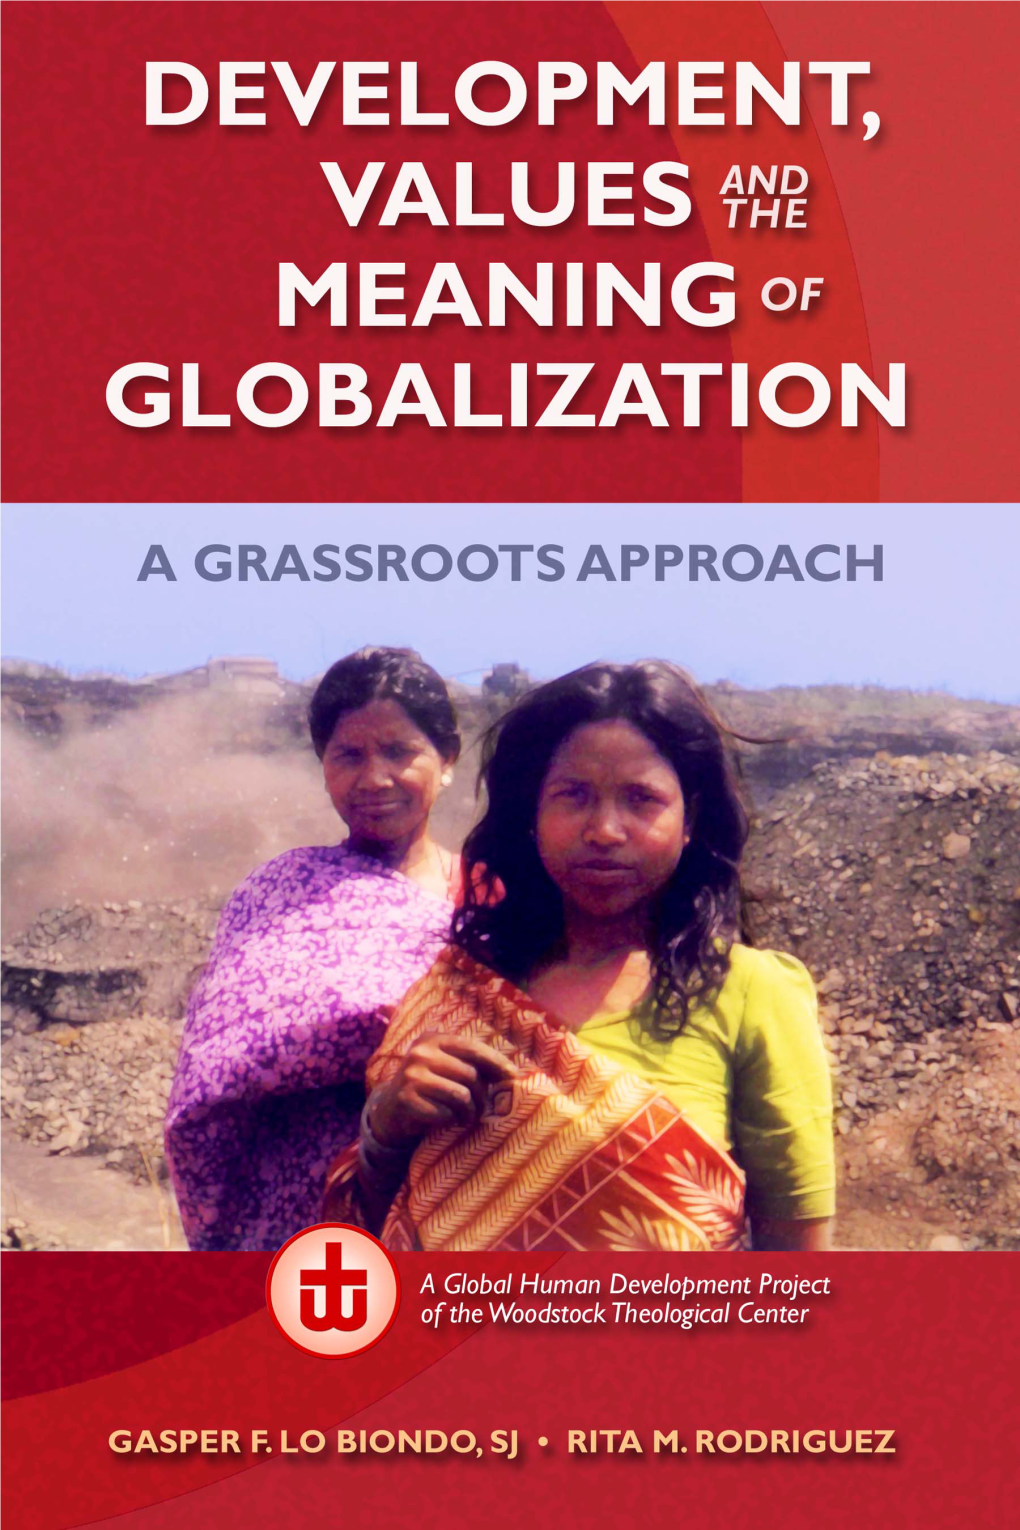 Development, Values, and the Meaning of Globalization: a Grassroots Approach